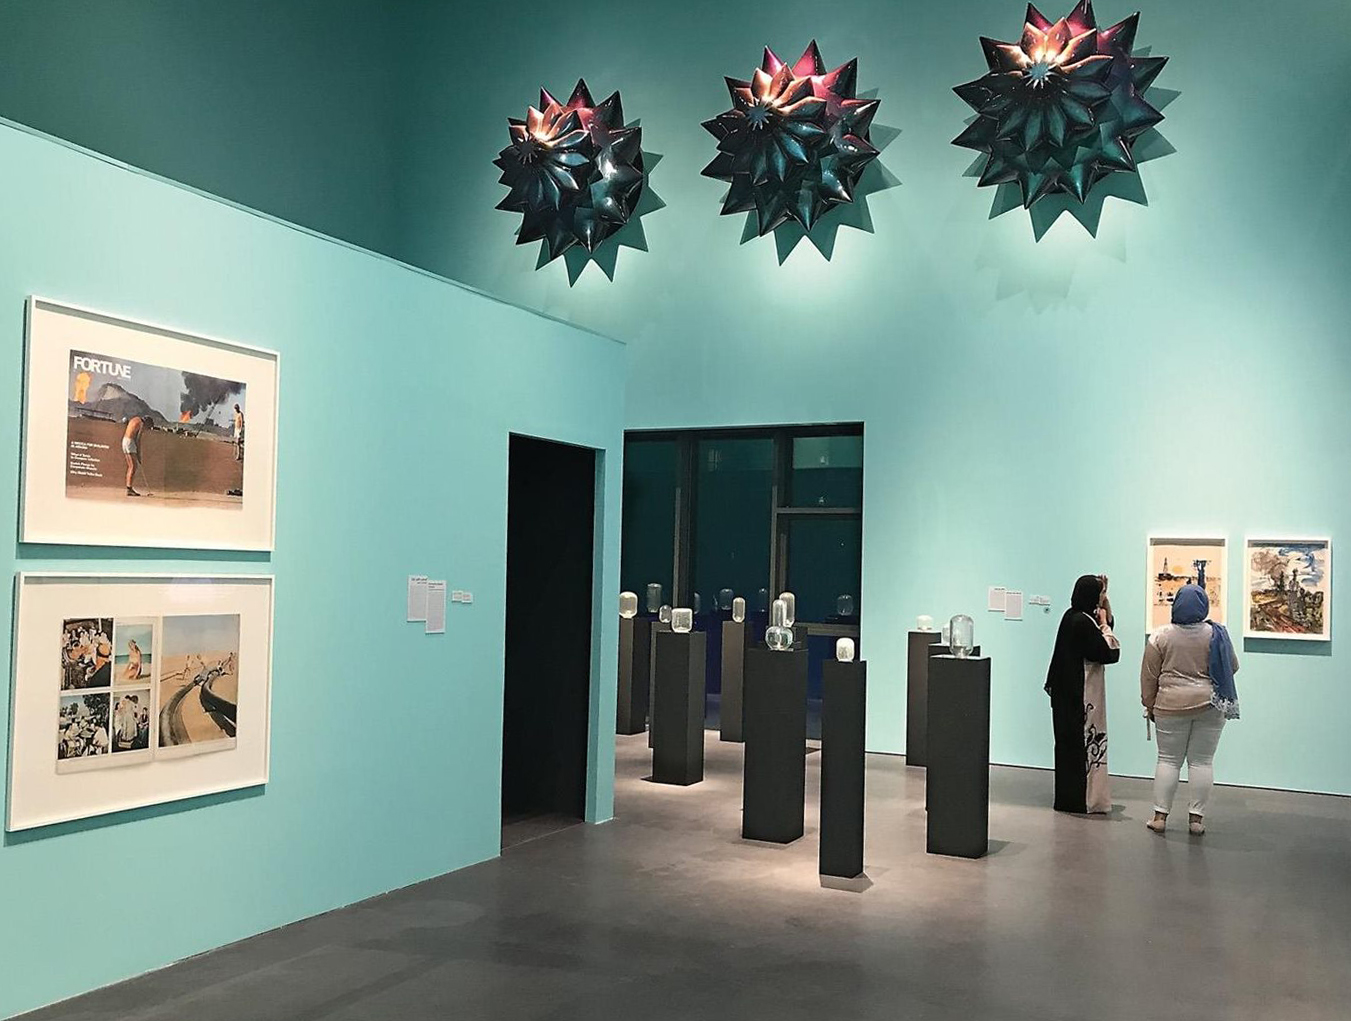 This gallery view of &ldquo;Crude&rdquo; includes works by four of the show&rsquo;s 17 artists: Monira Al Qadiri, &ldquo;Flower Drill,&rdquo; 2016, fiberglass and automotive paint, top; Raja&rsquo;a Khalid, &ldquo;Fortune/Golf,&rdquo; 2014, archival inkjet prints, left; Michael John Whelan, &ldquo;Aqua Lung,&rdquo; 2018, blown glass objects made of sand obtained from the site of Jacques Cousteau&rsquo;s 1954 British Petroleum-sponsored maritime survey, center; paintings by Houshang Pezeshkhian, right.